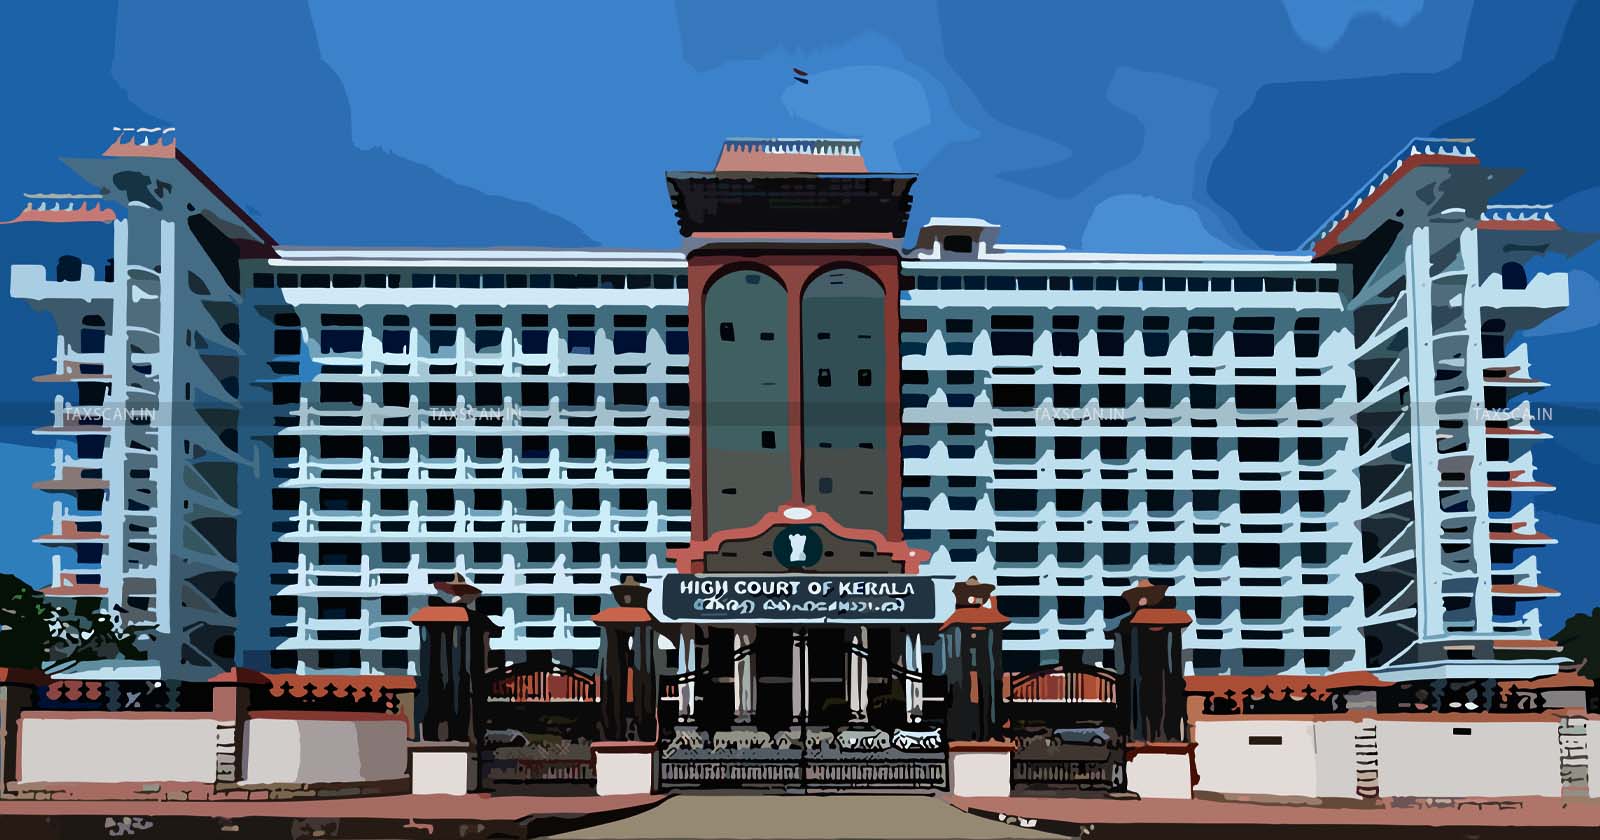 Demand of Service Tax without Giving Proper Opportunity to be Heard: Delhi HC directs Readjudication [Read Order]